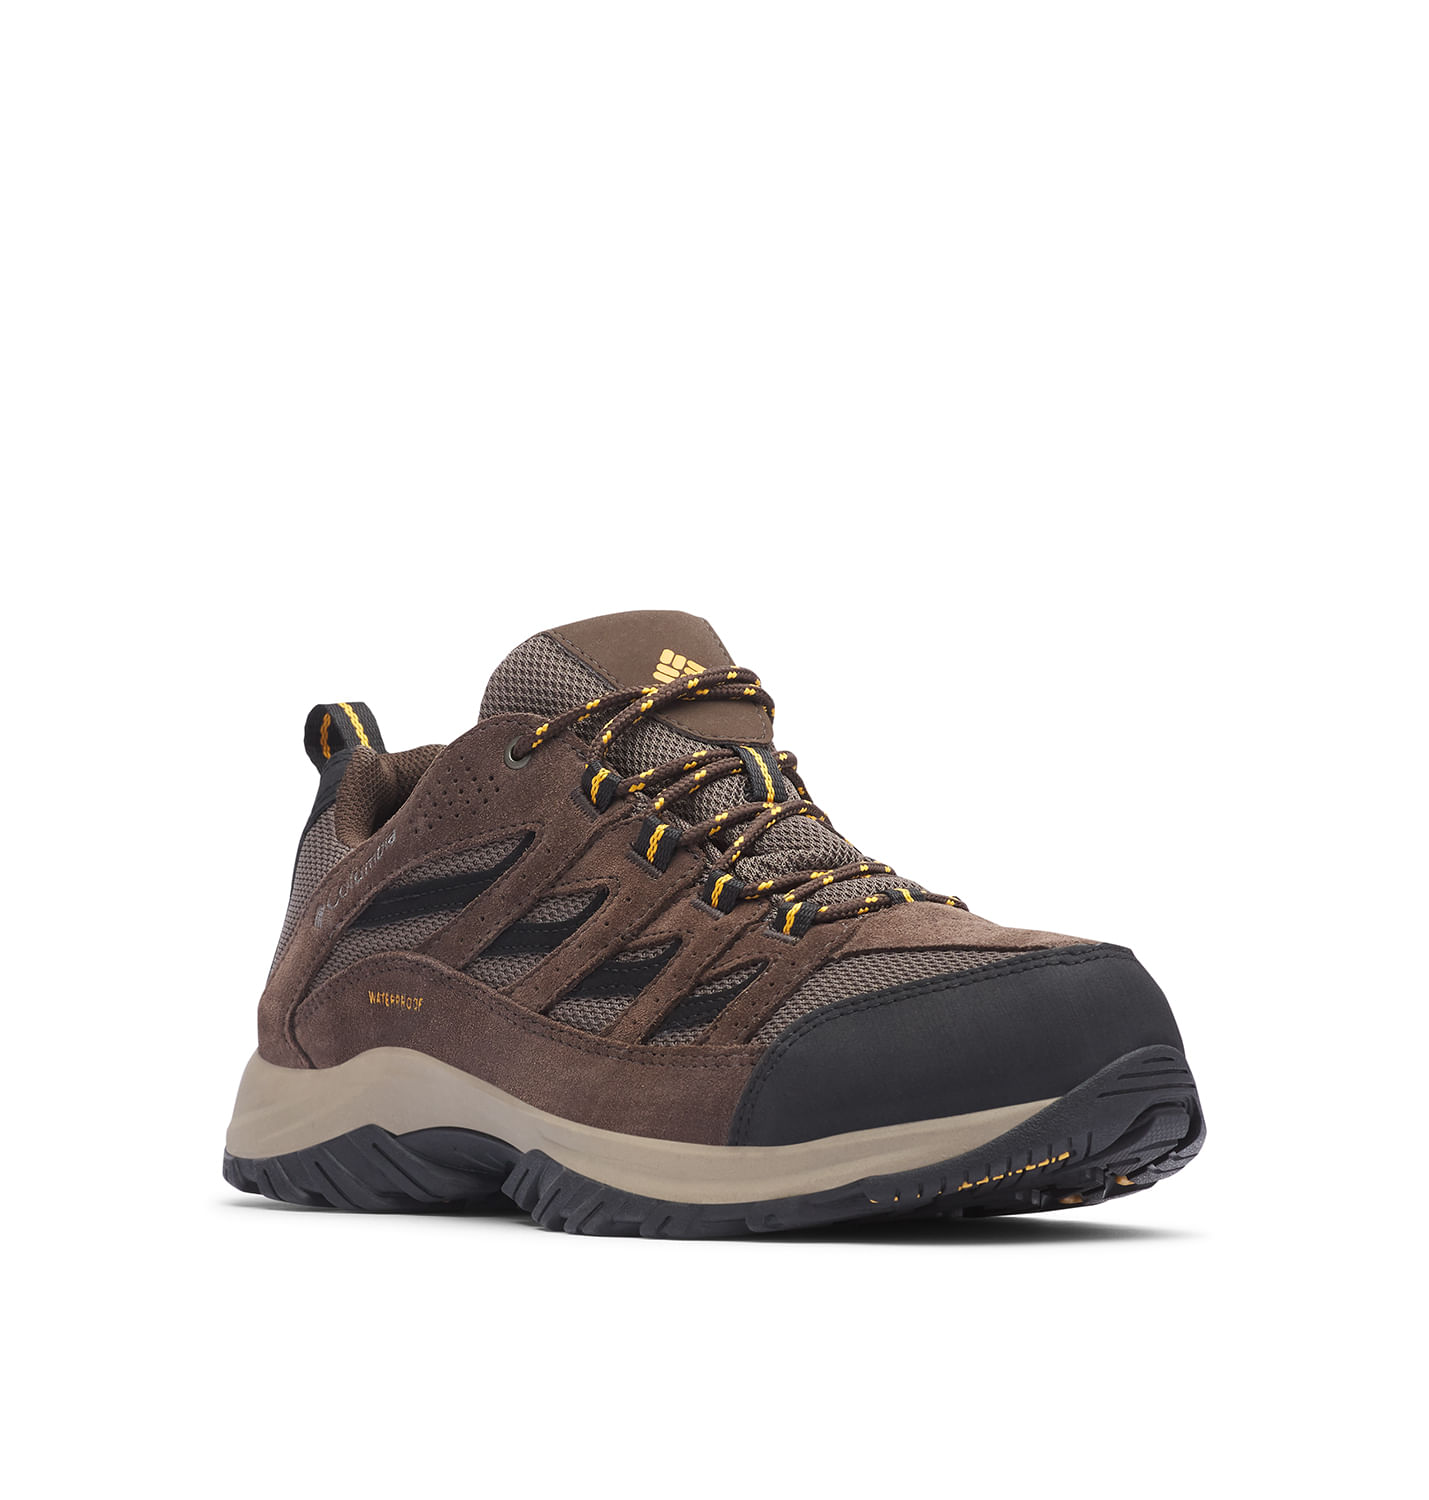 Zapatilla Impermeable Crestwood™ Waterproof Para Hombre - Columbia